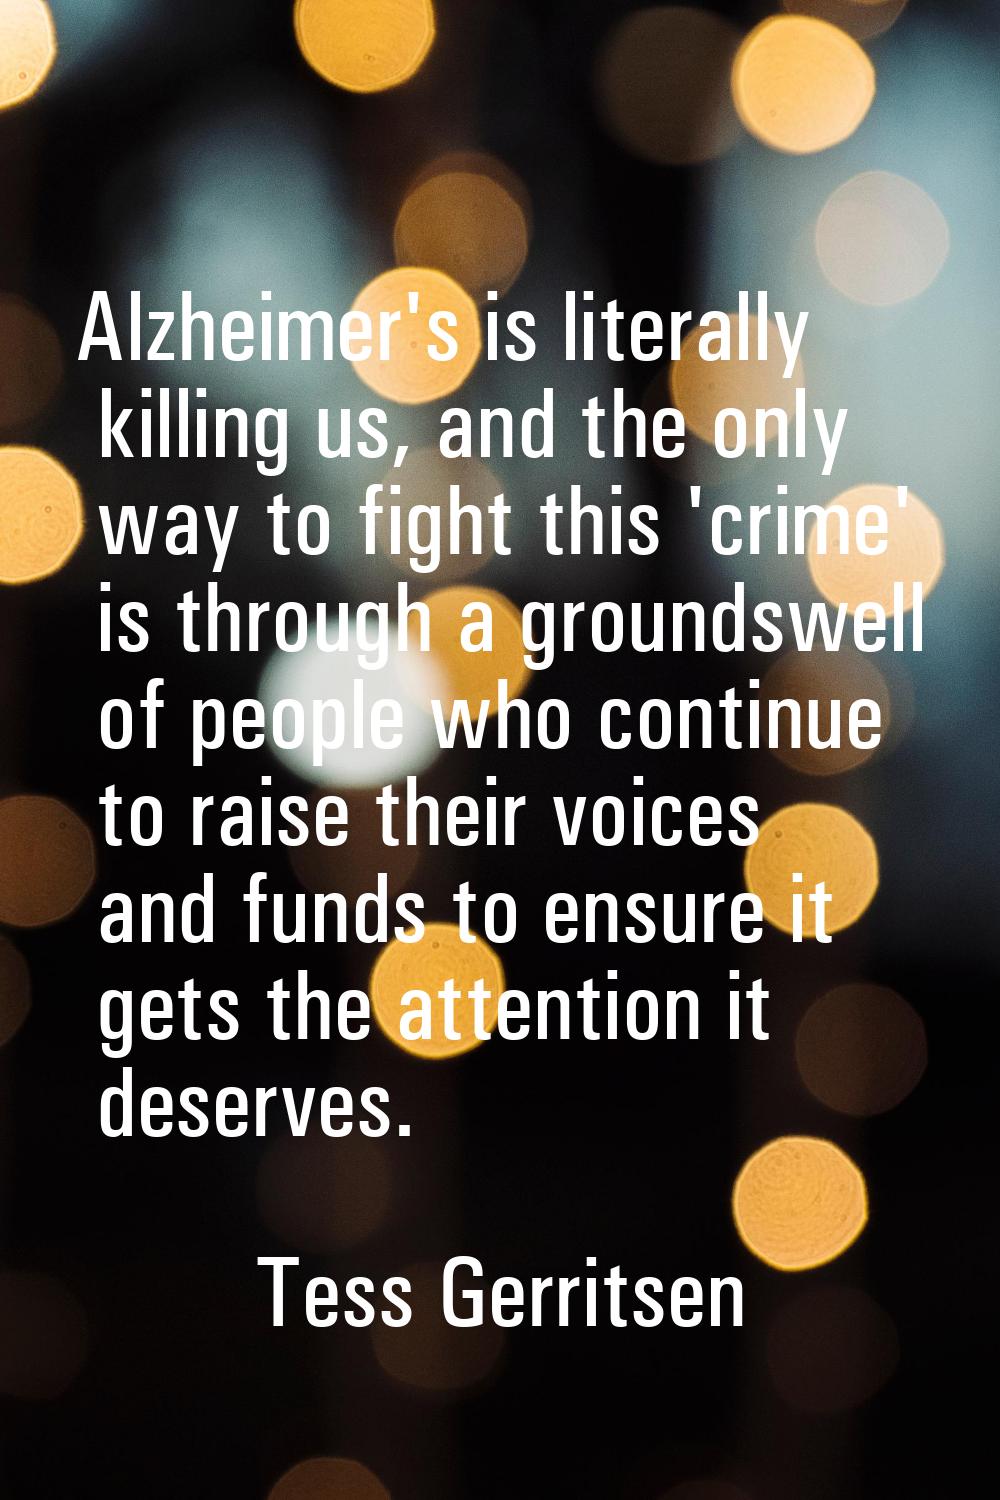 Alzheimer's is literally killing us, and the only way to fight this 'crime' is through a groundswel